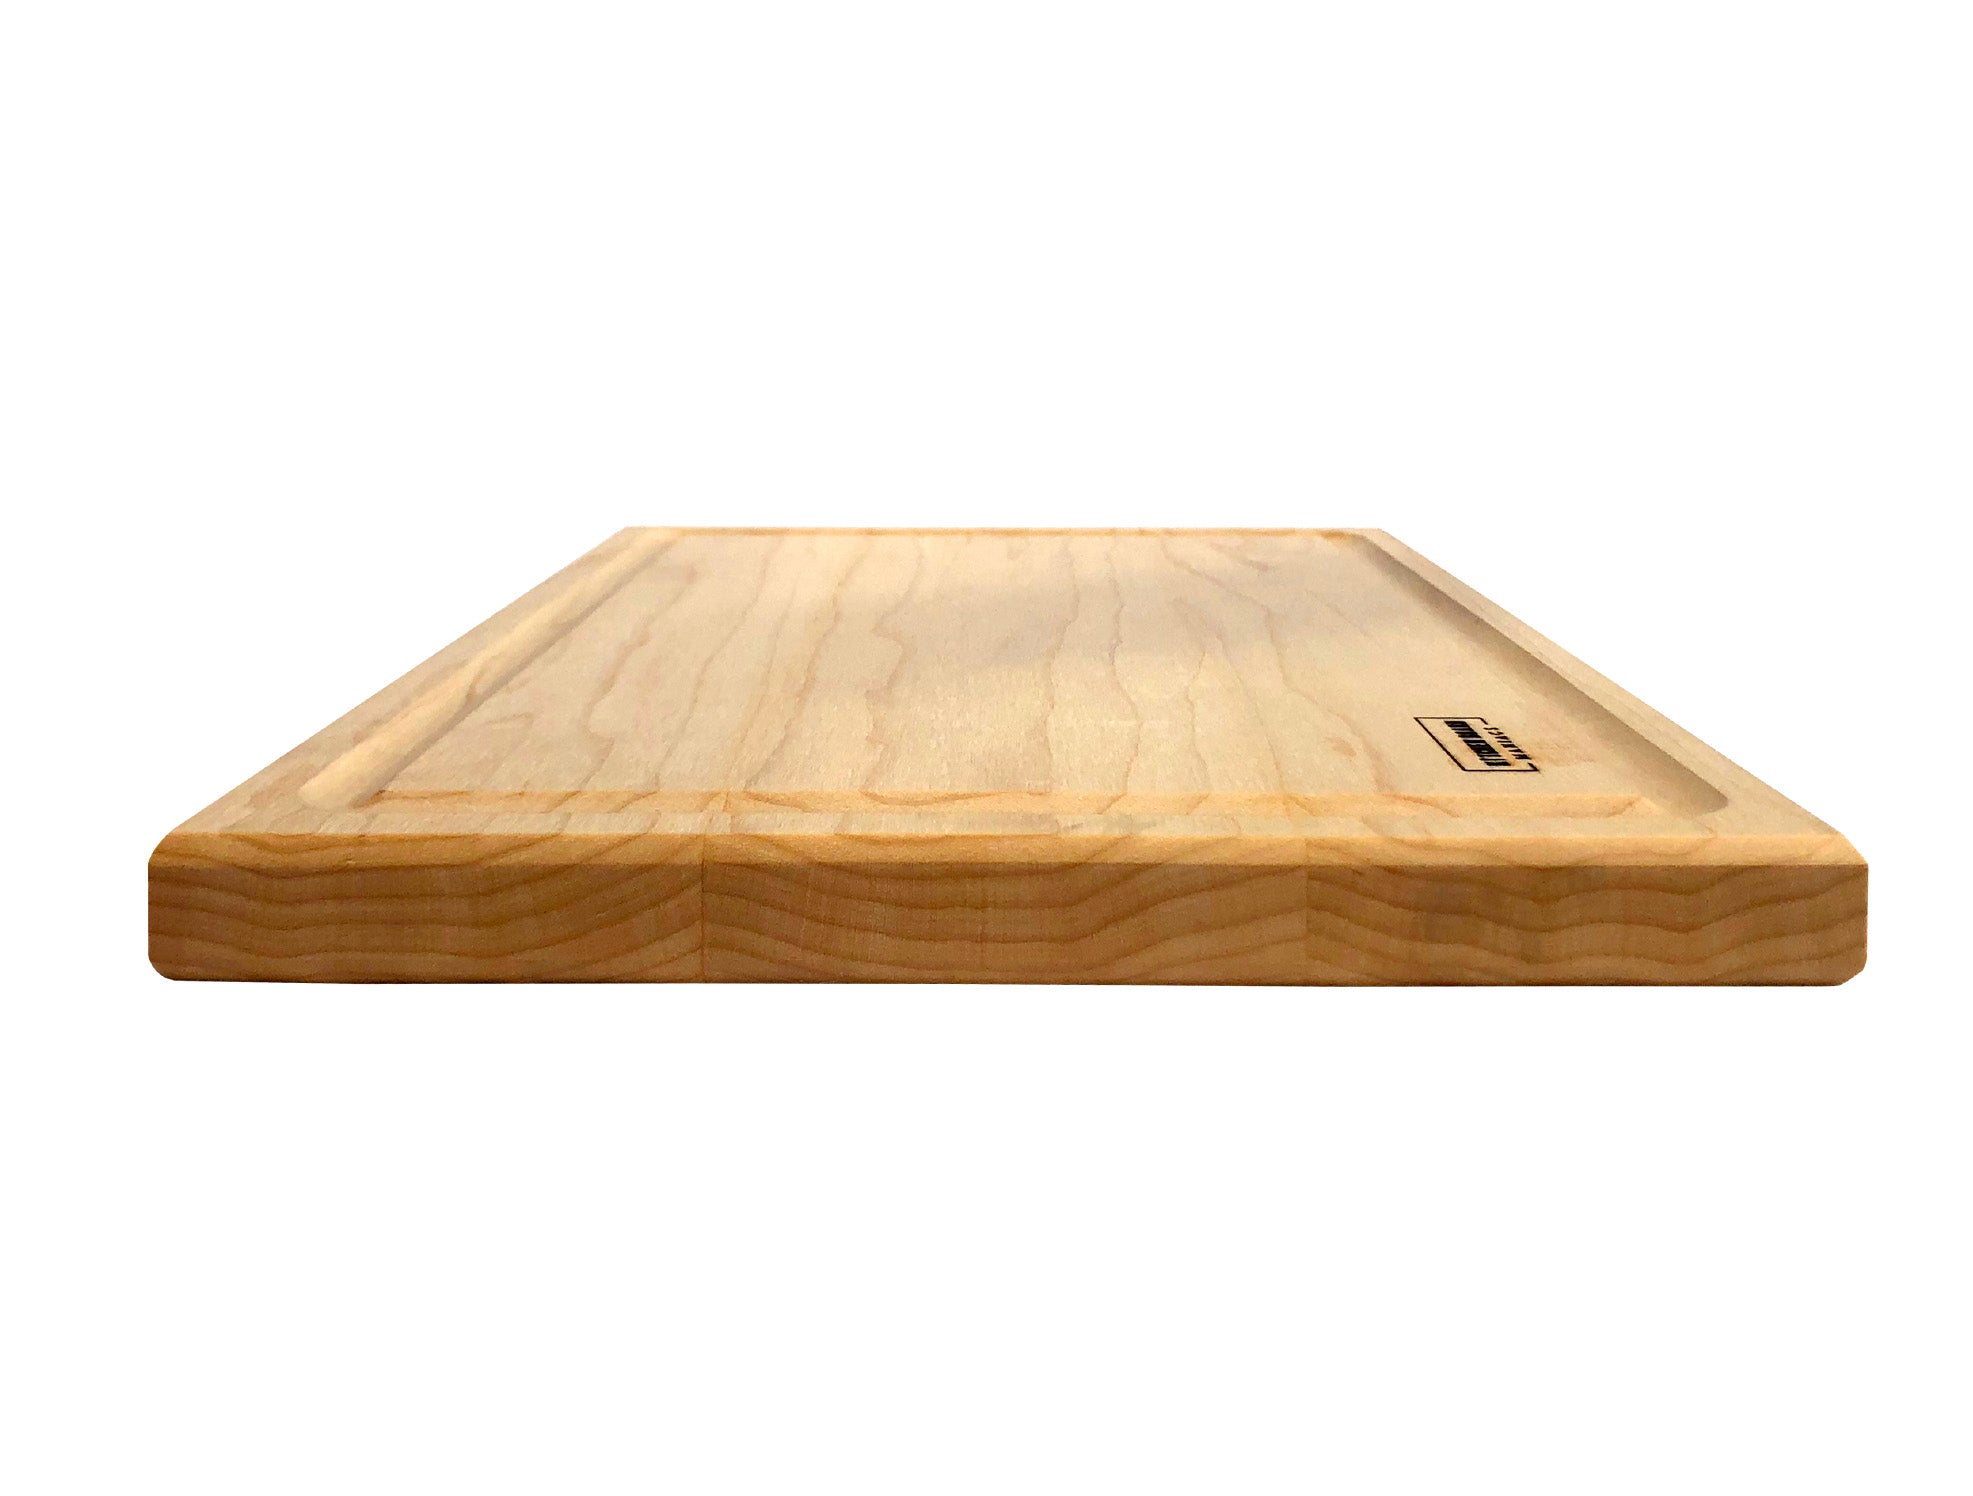 LARGE Maple Wood Cutting Boards for Kitchen 14x10 - Great Butter Board